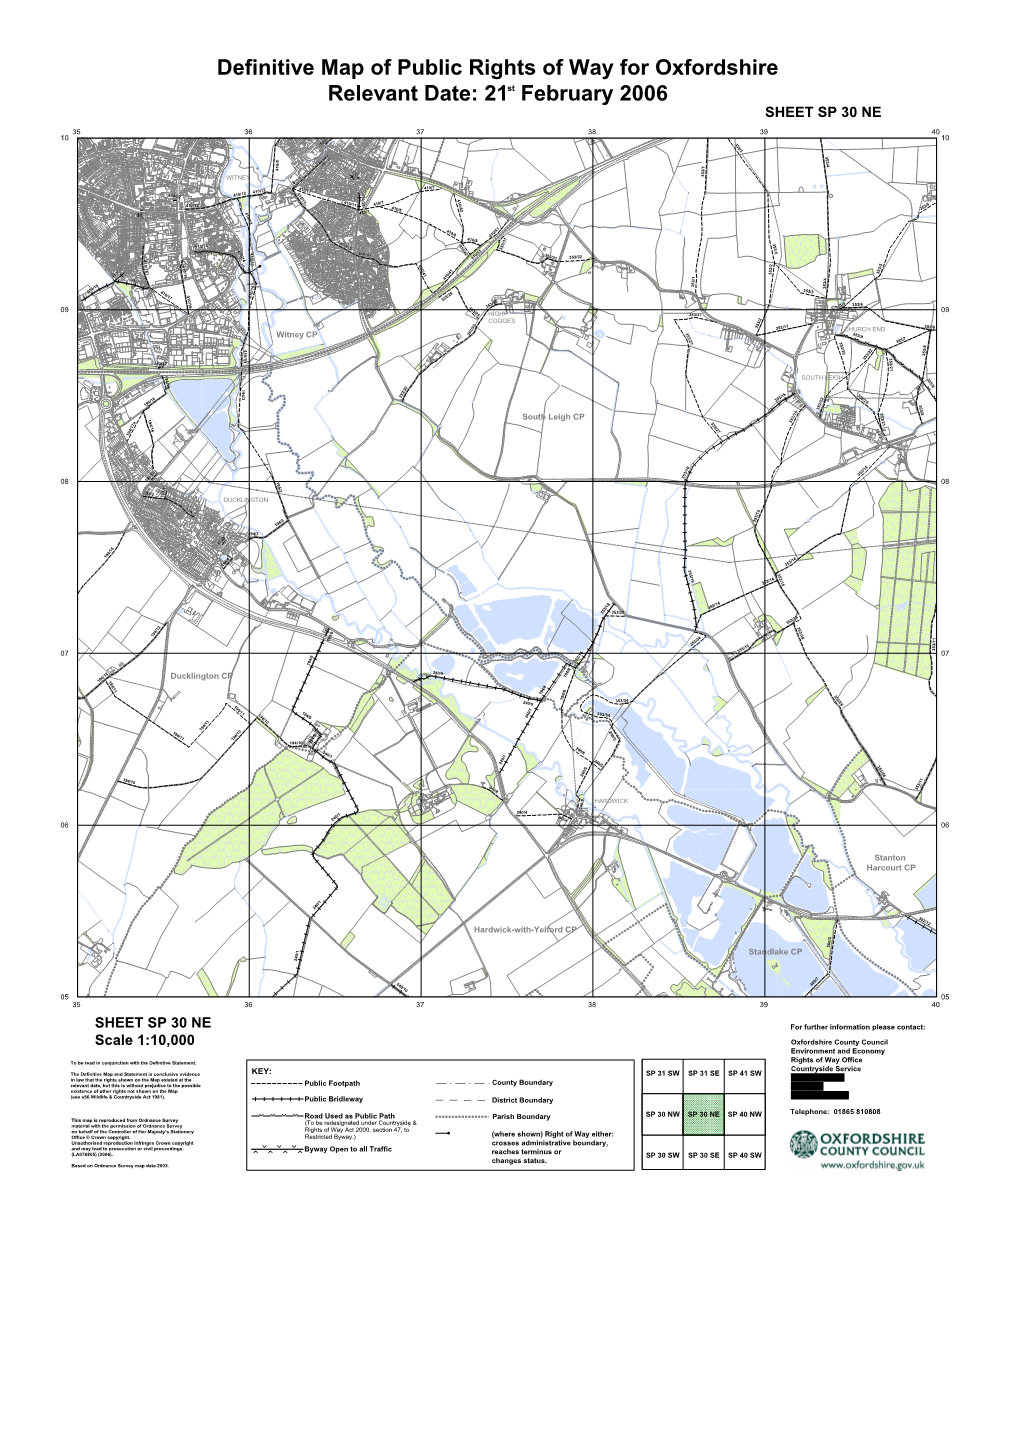 Definitive Map of Public Rights of Way for Oxfordshire Relevant Date: 21St February 2006 Colour SHEET SP 30 NE